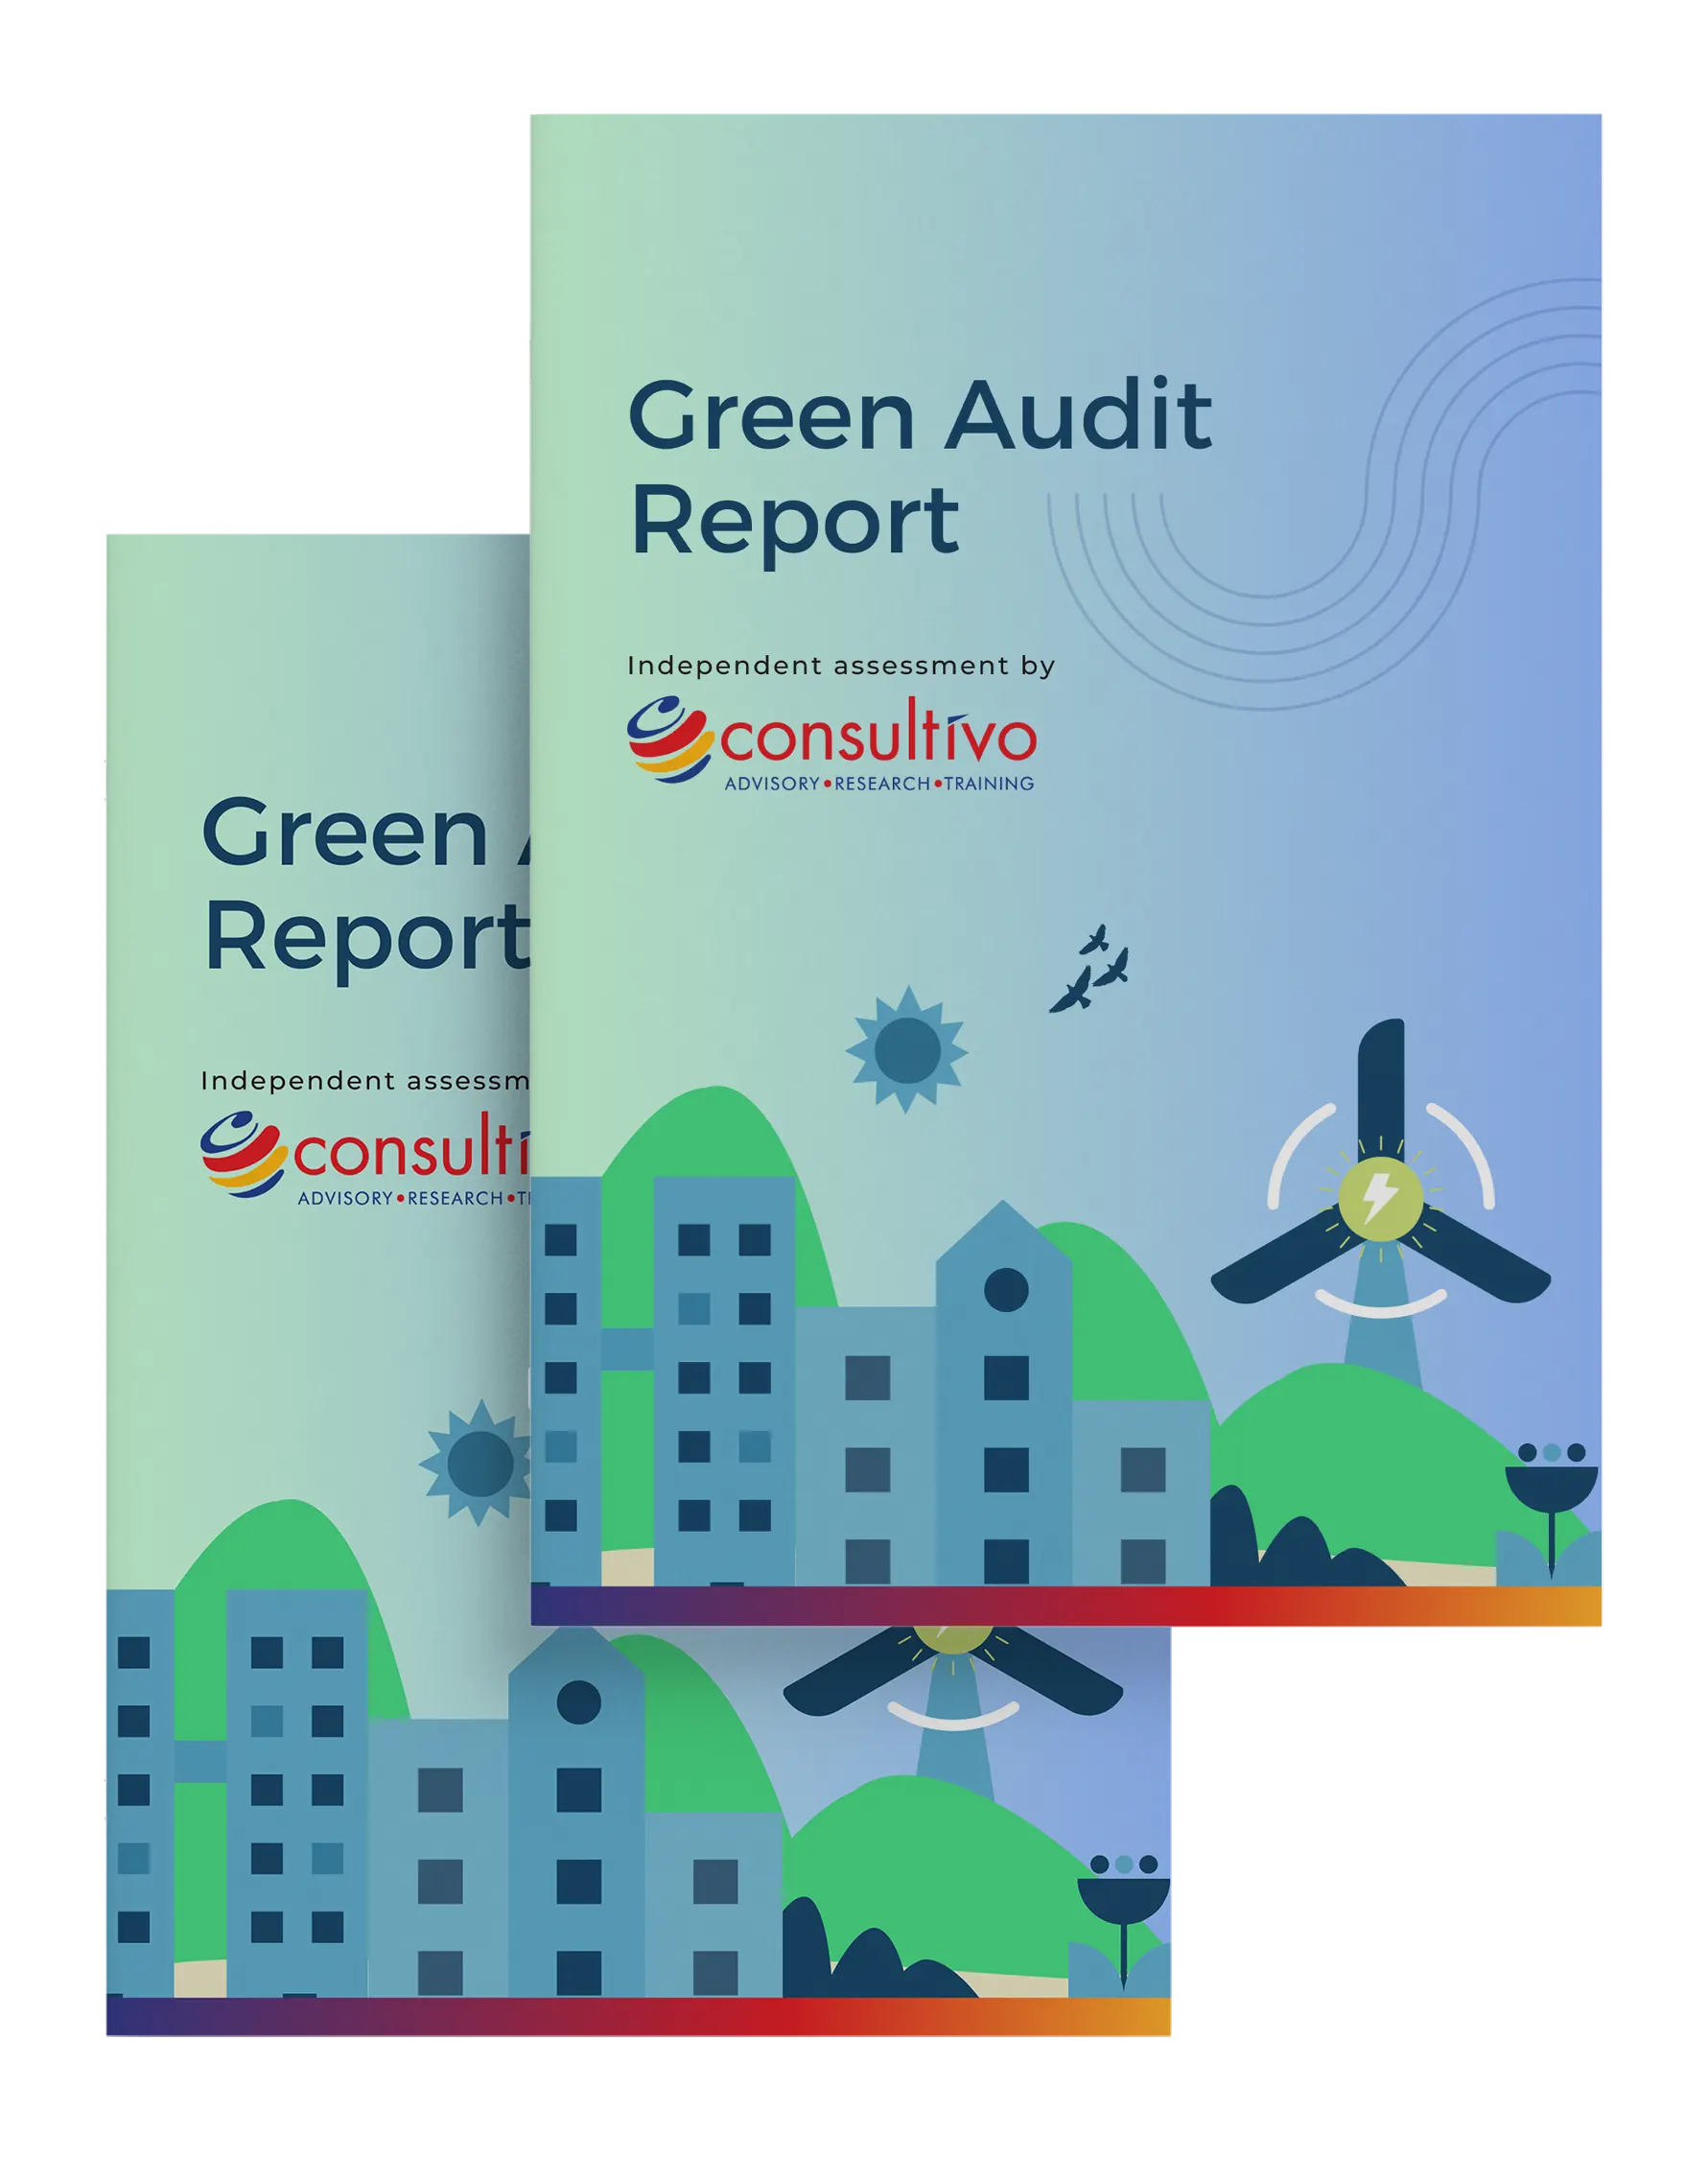 Green audit report for NAAC Colleges